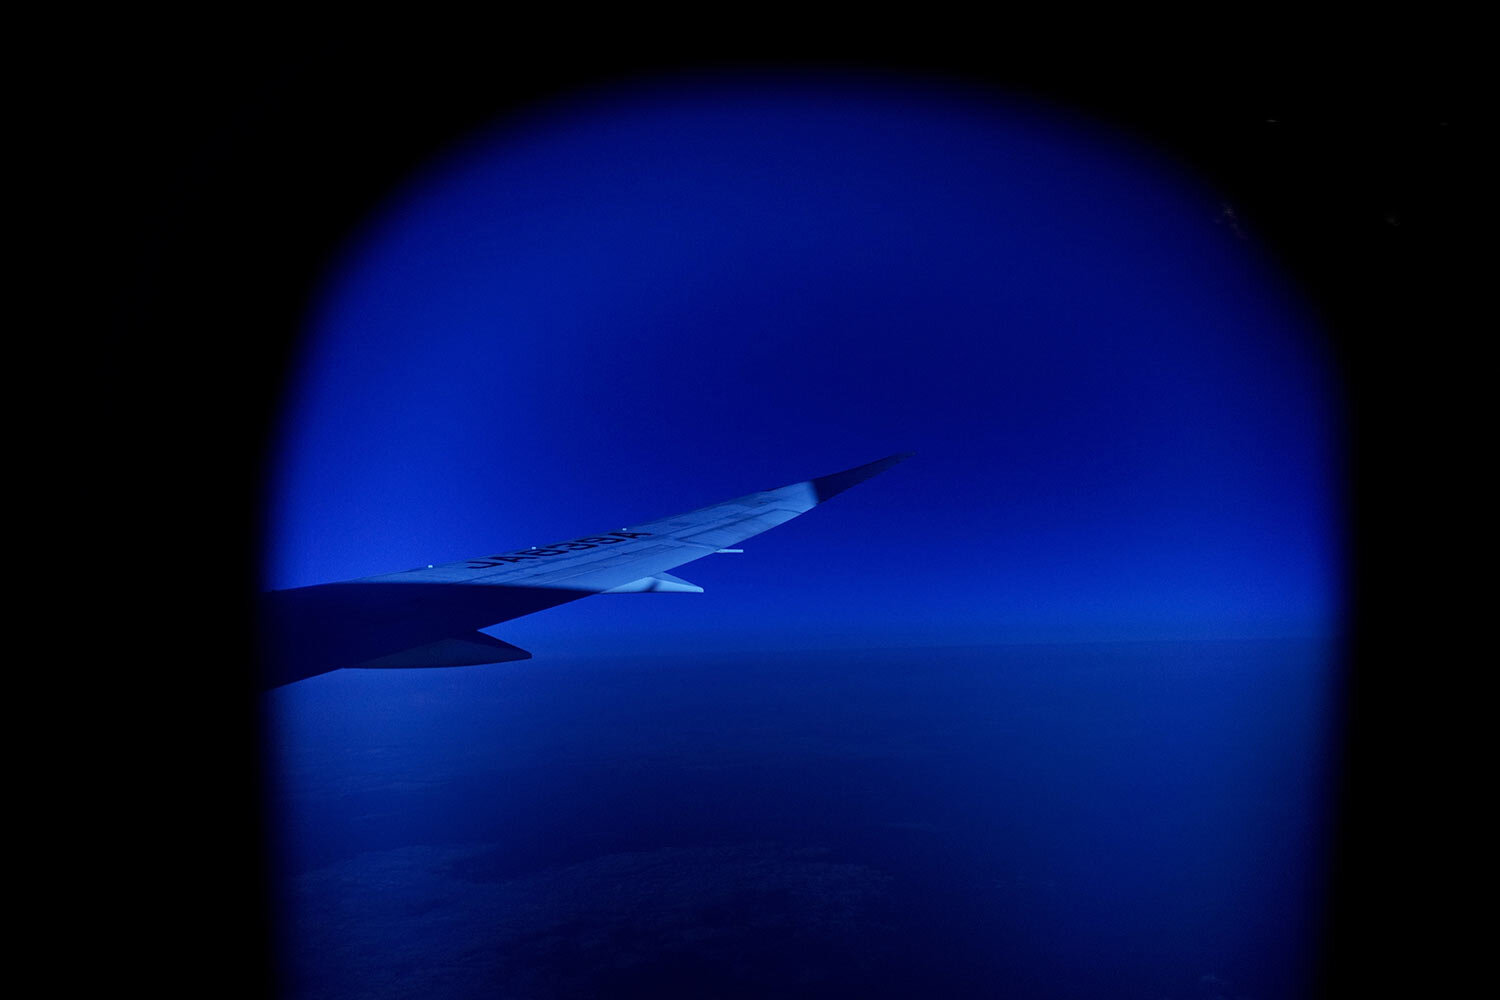  A wing of a plane is seen through a window on a flight Monday, July 19, 2021, from Frankfurt, Germany to Tokyo ahead of the 2020 Summer Olympics. (AP Photo/Natacha Pisarenko) 